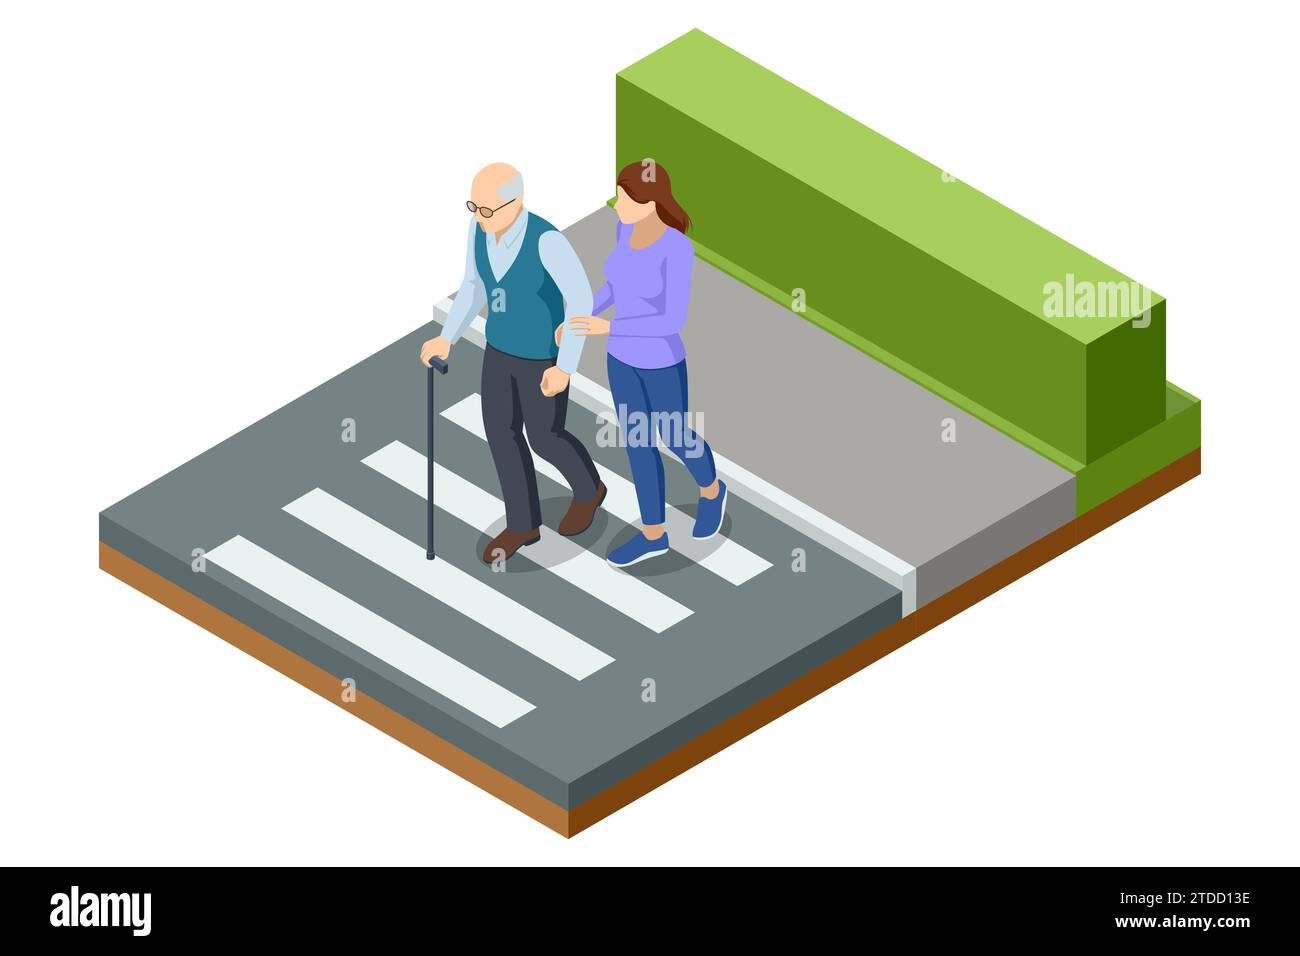 Isometric concept of helping the elderly in the city. A woman helps an old man cross the road at a pedestrian crossing Stock Vector